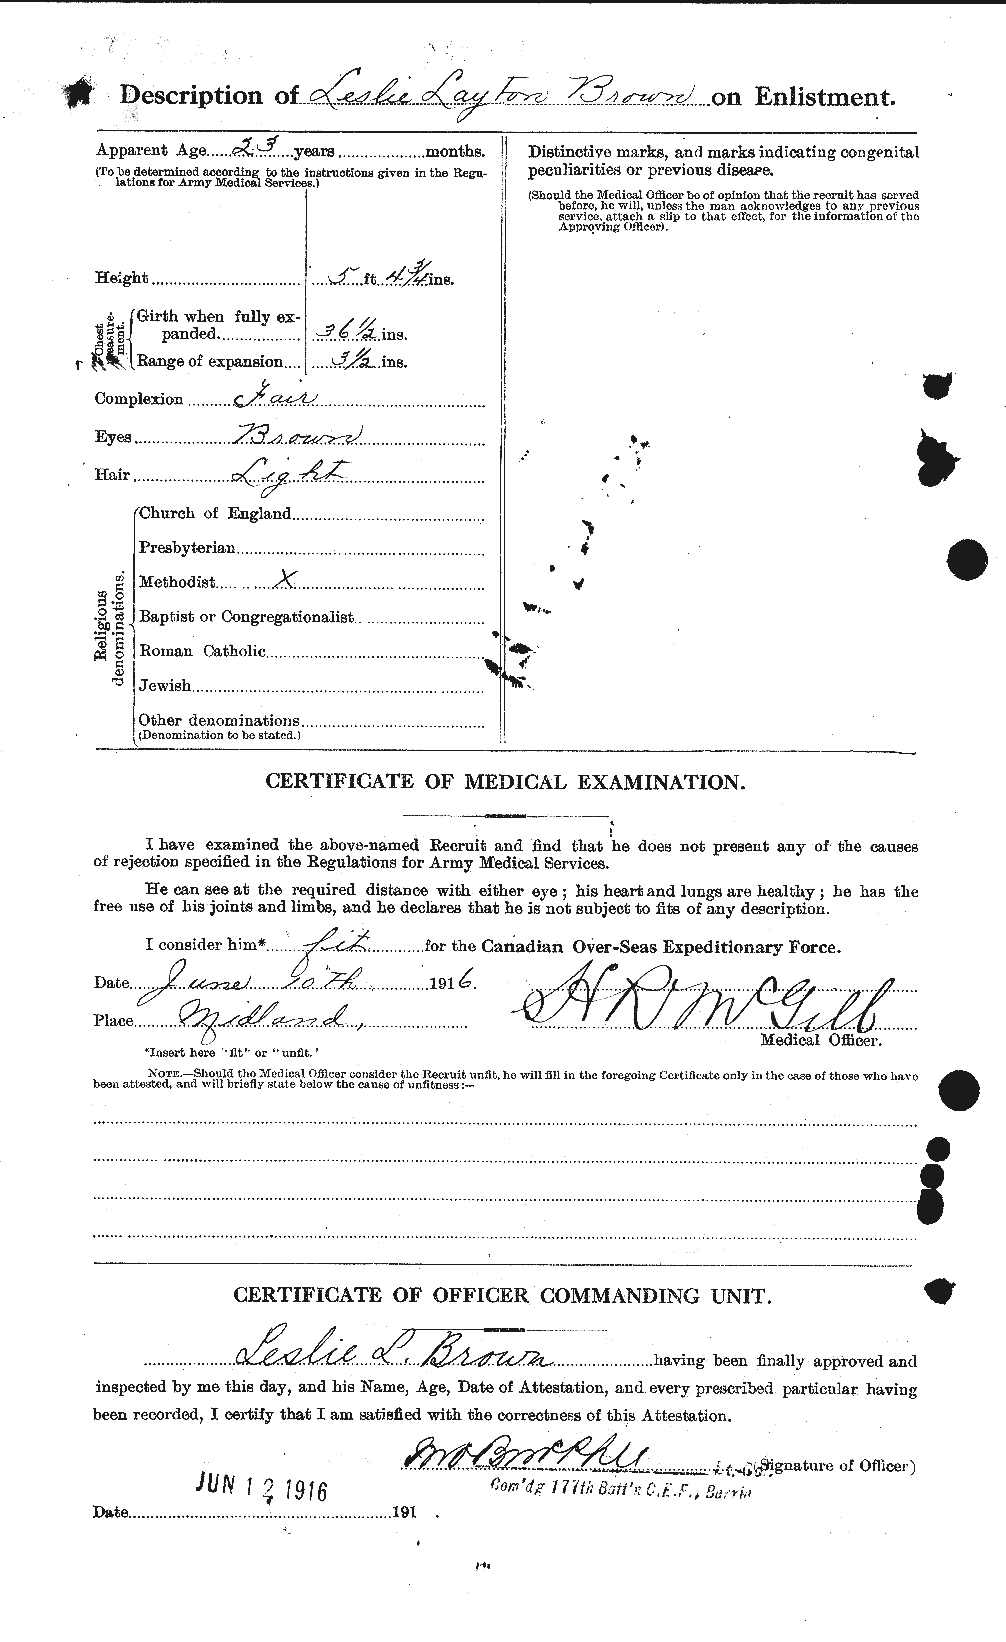 Personnel Records of the First World War - CEF 266309b